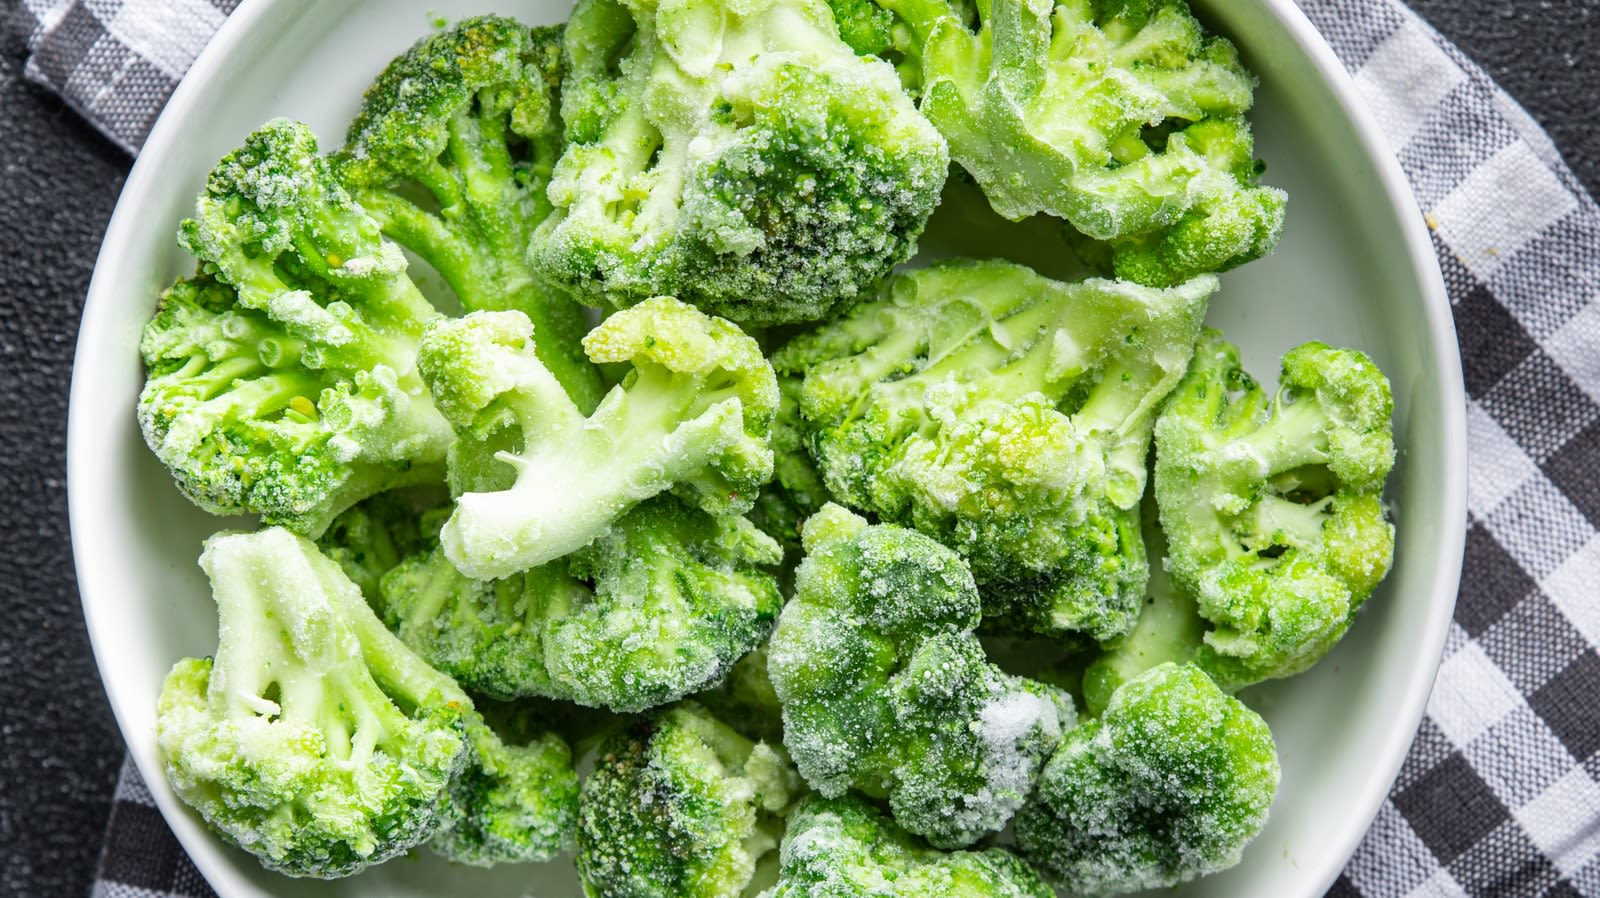 15 Ways To Add More Flavor To Frozen Broccoli